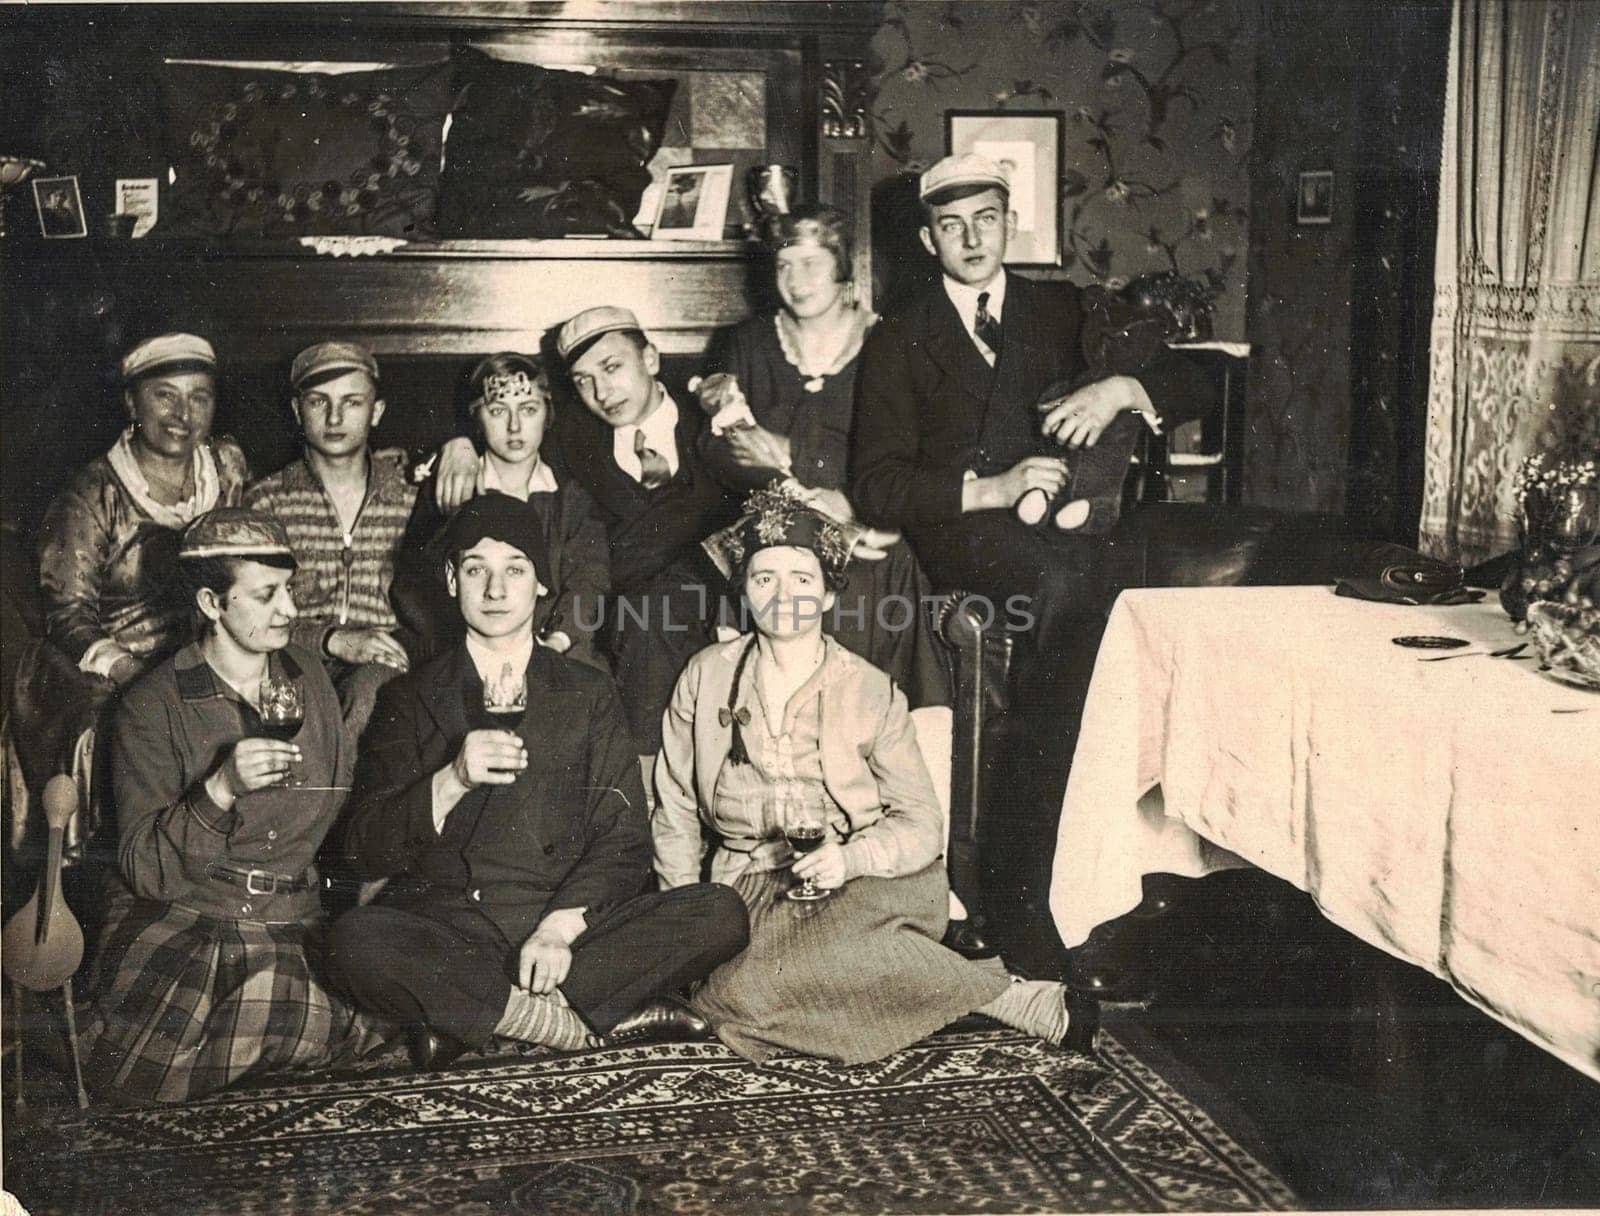 GERMANY - FEBRUARY 17, 1930: The retro photo shows a group of happy people celebrate a social event - birthday, party...Golden the thirties before the war.